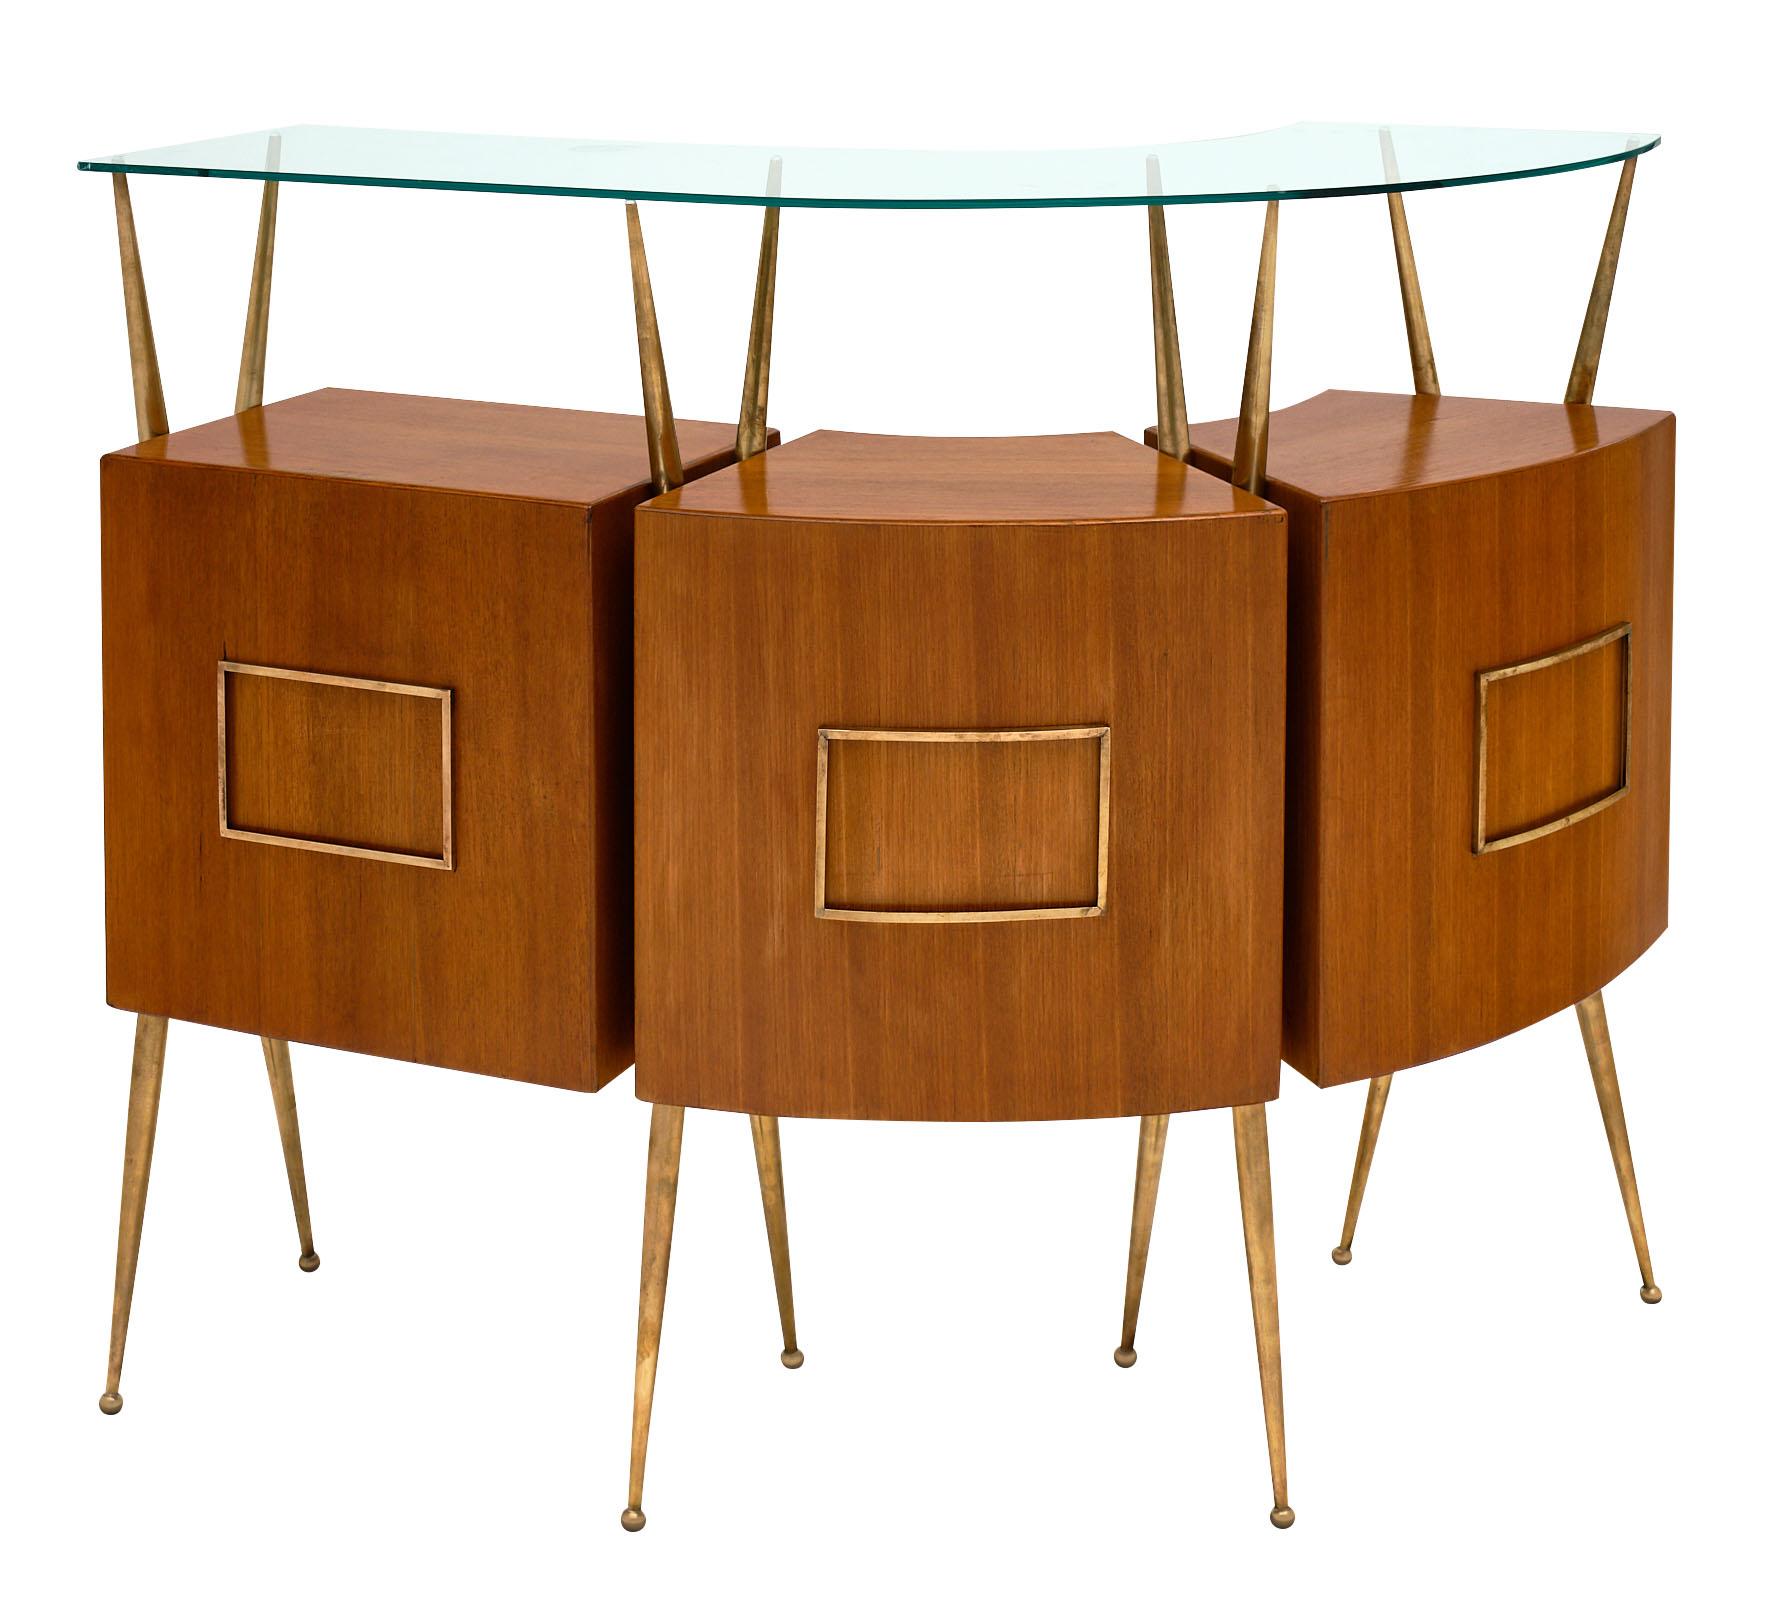 Midcentury Paolo Buffa style Italian bar and case piece made of rosewood with gilt brass structure. The asymmetrical bar has a glass top as well. The case piece has a mirrored interior and glass shelf. The measurements listed are for the bar itself.